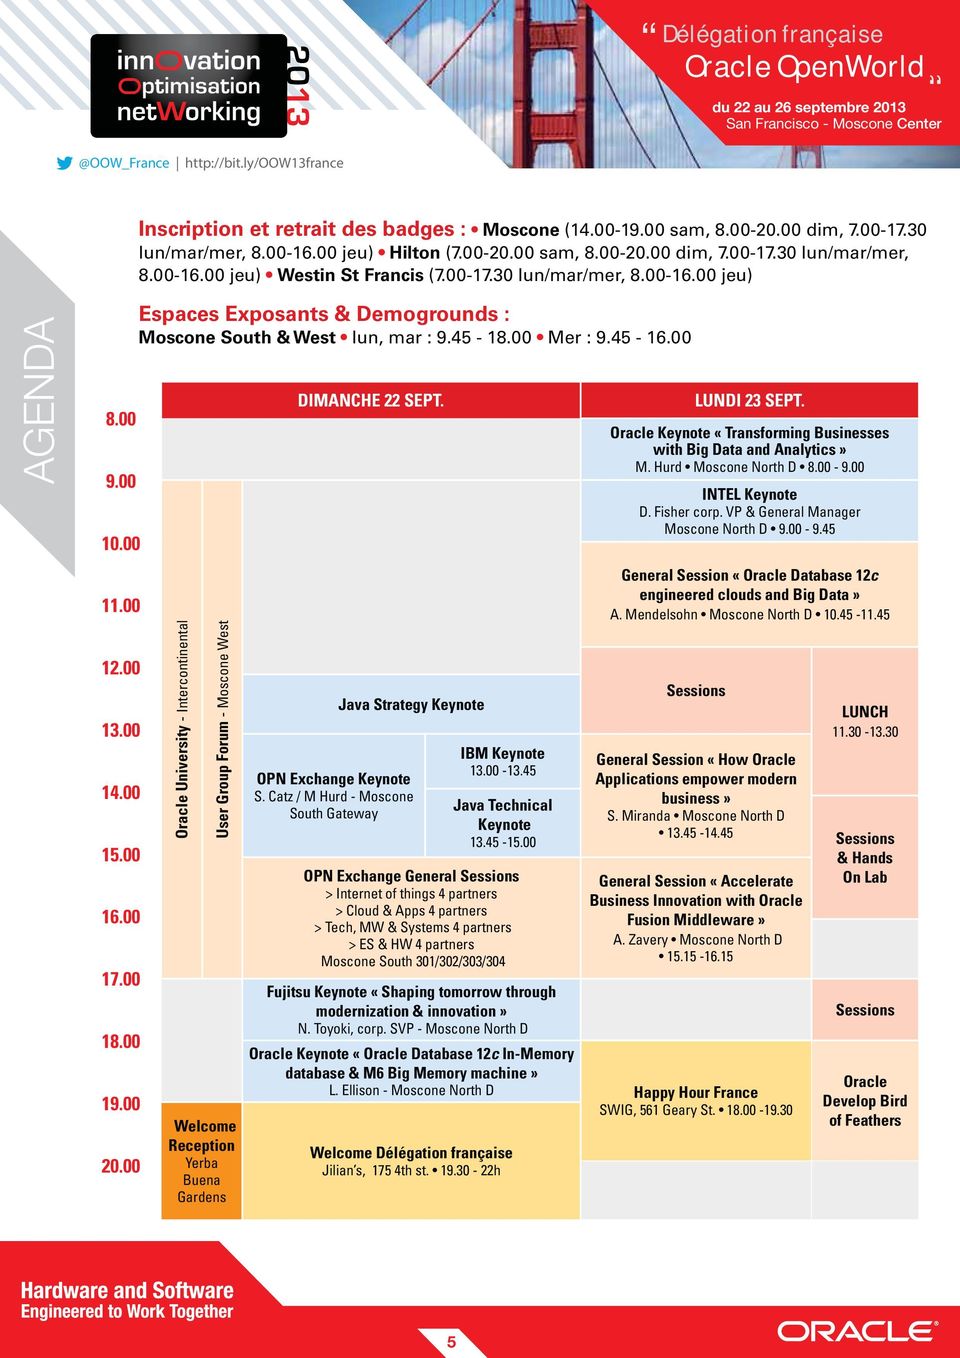 00 Mer : 9.45-16.00 Oracle University - Intercontinental User Group Forum - Moscone West Welcome Reception Yerba Buena Gardens DIMANCHE 22 SEPT. Java Strategy Keynote OPN Exchange Keynote S.